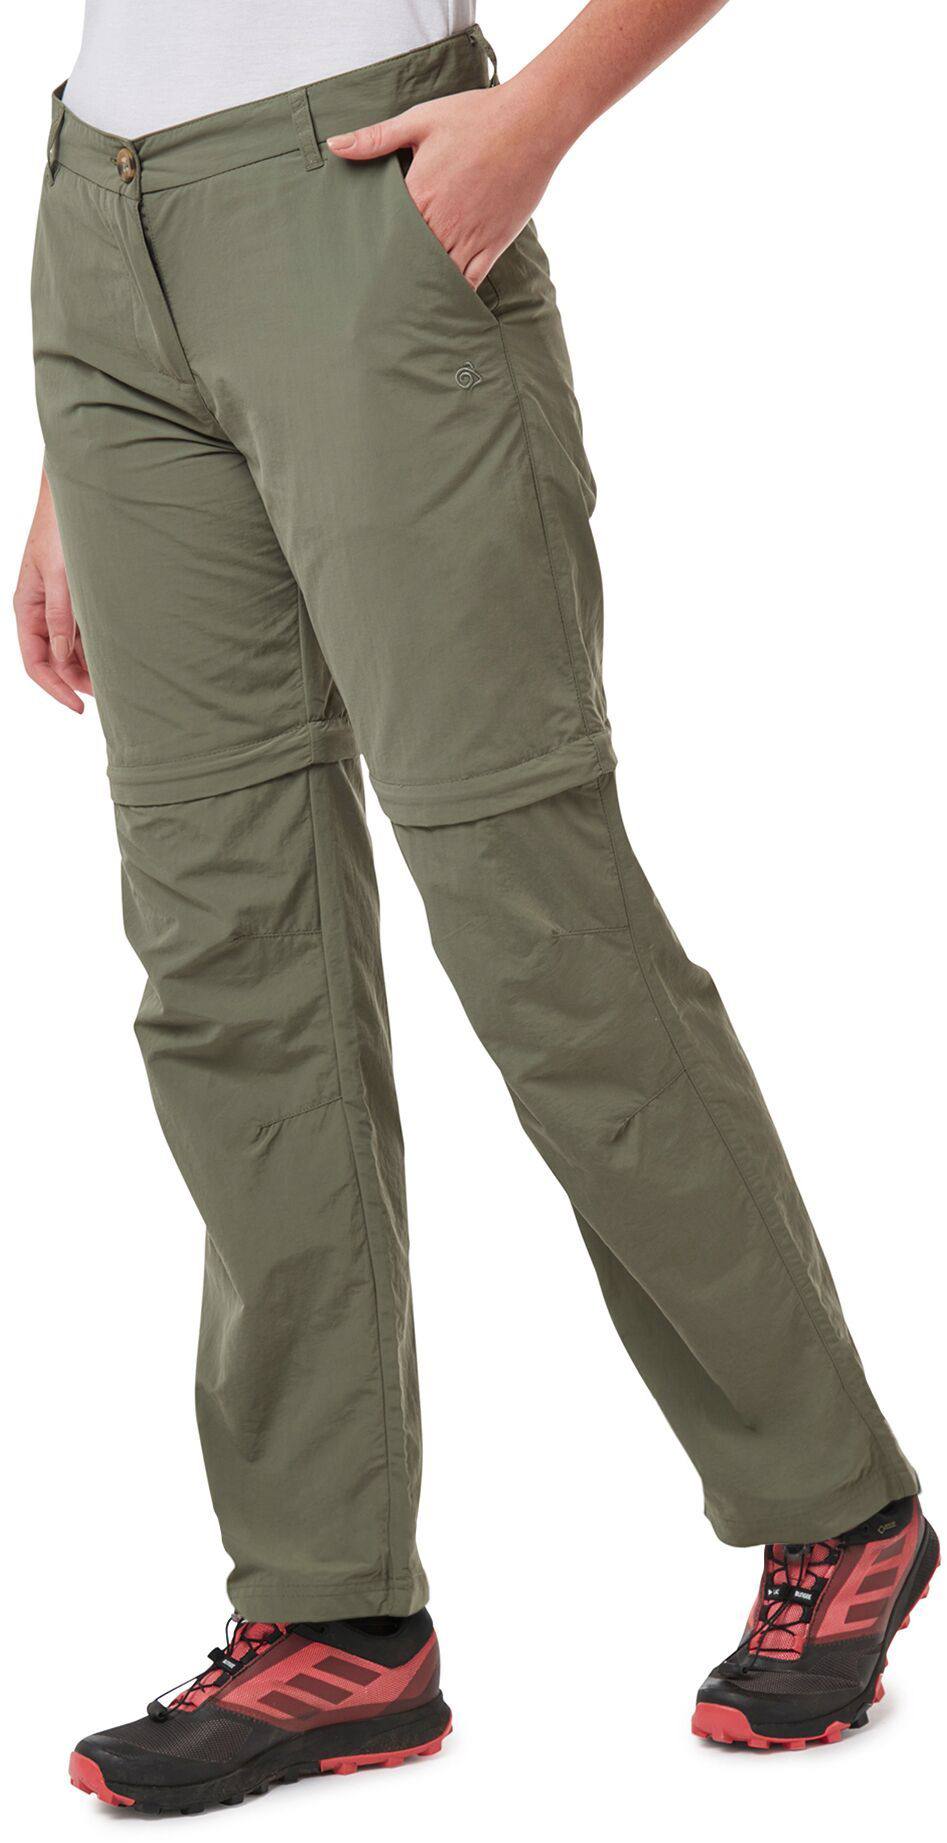 Craghoppers Women’s Nosilife Convertible Long Trousers